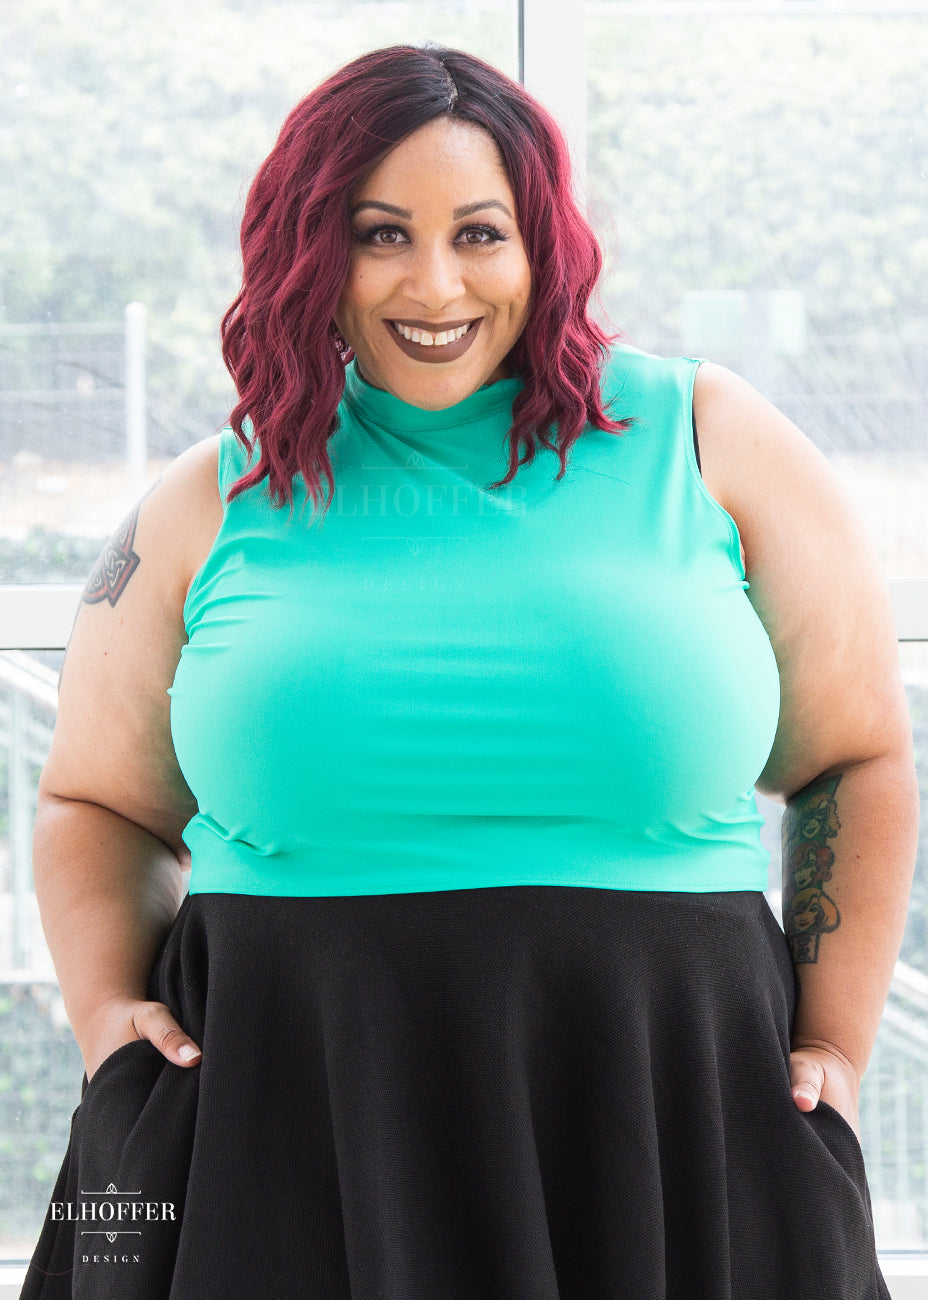 Dawn, a medium-dark skinned 3X model with maroon ombre hair, models the mock turtle necked, mint green Jes crop top. She has paired it with our black knit skirt.